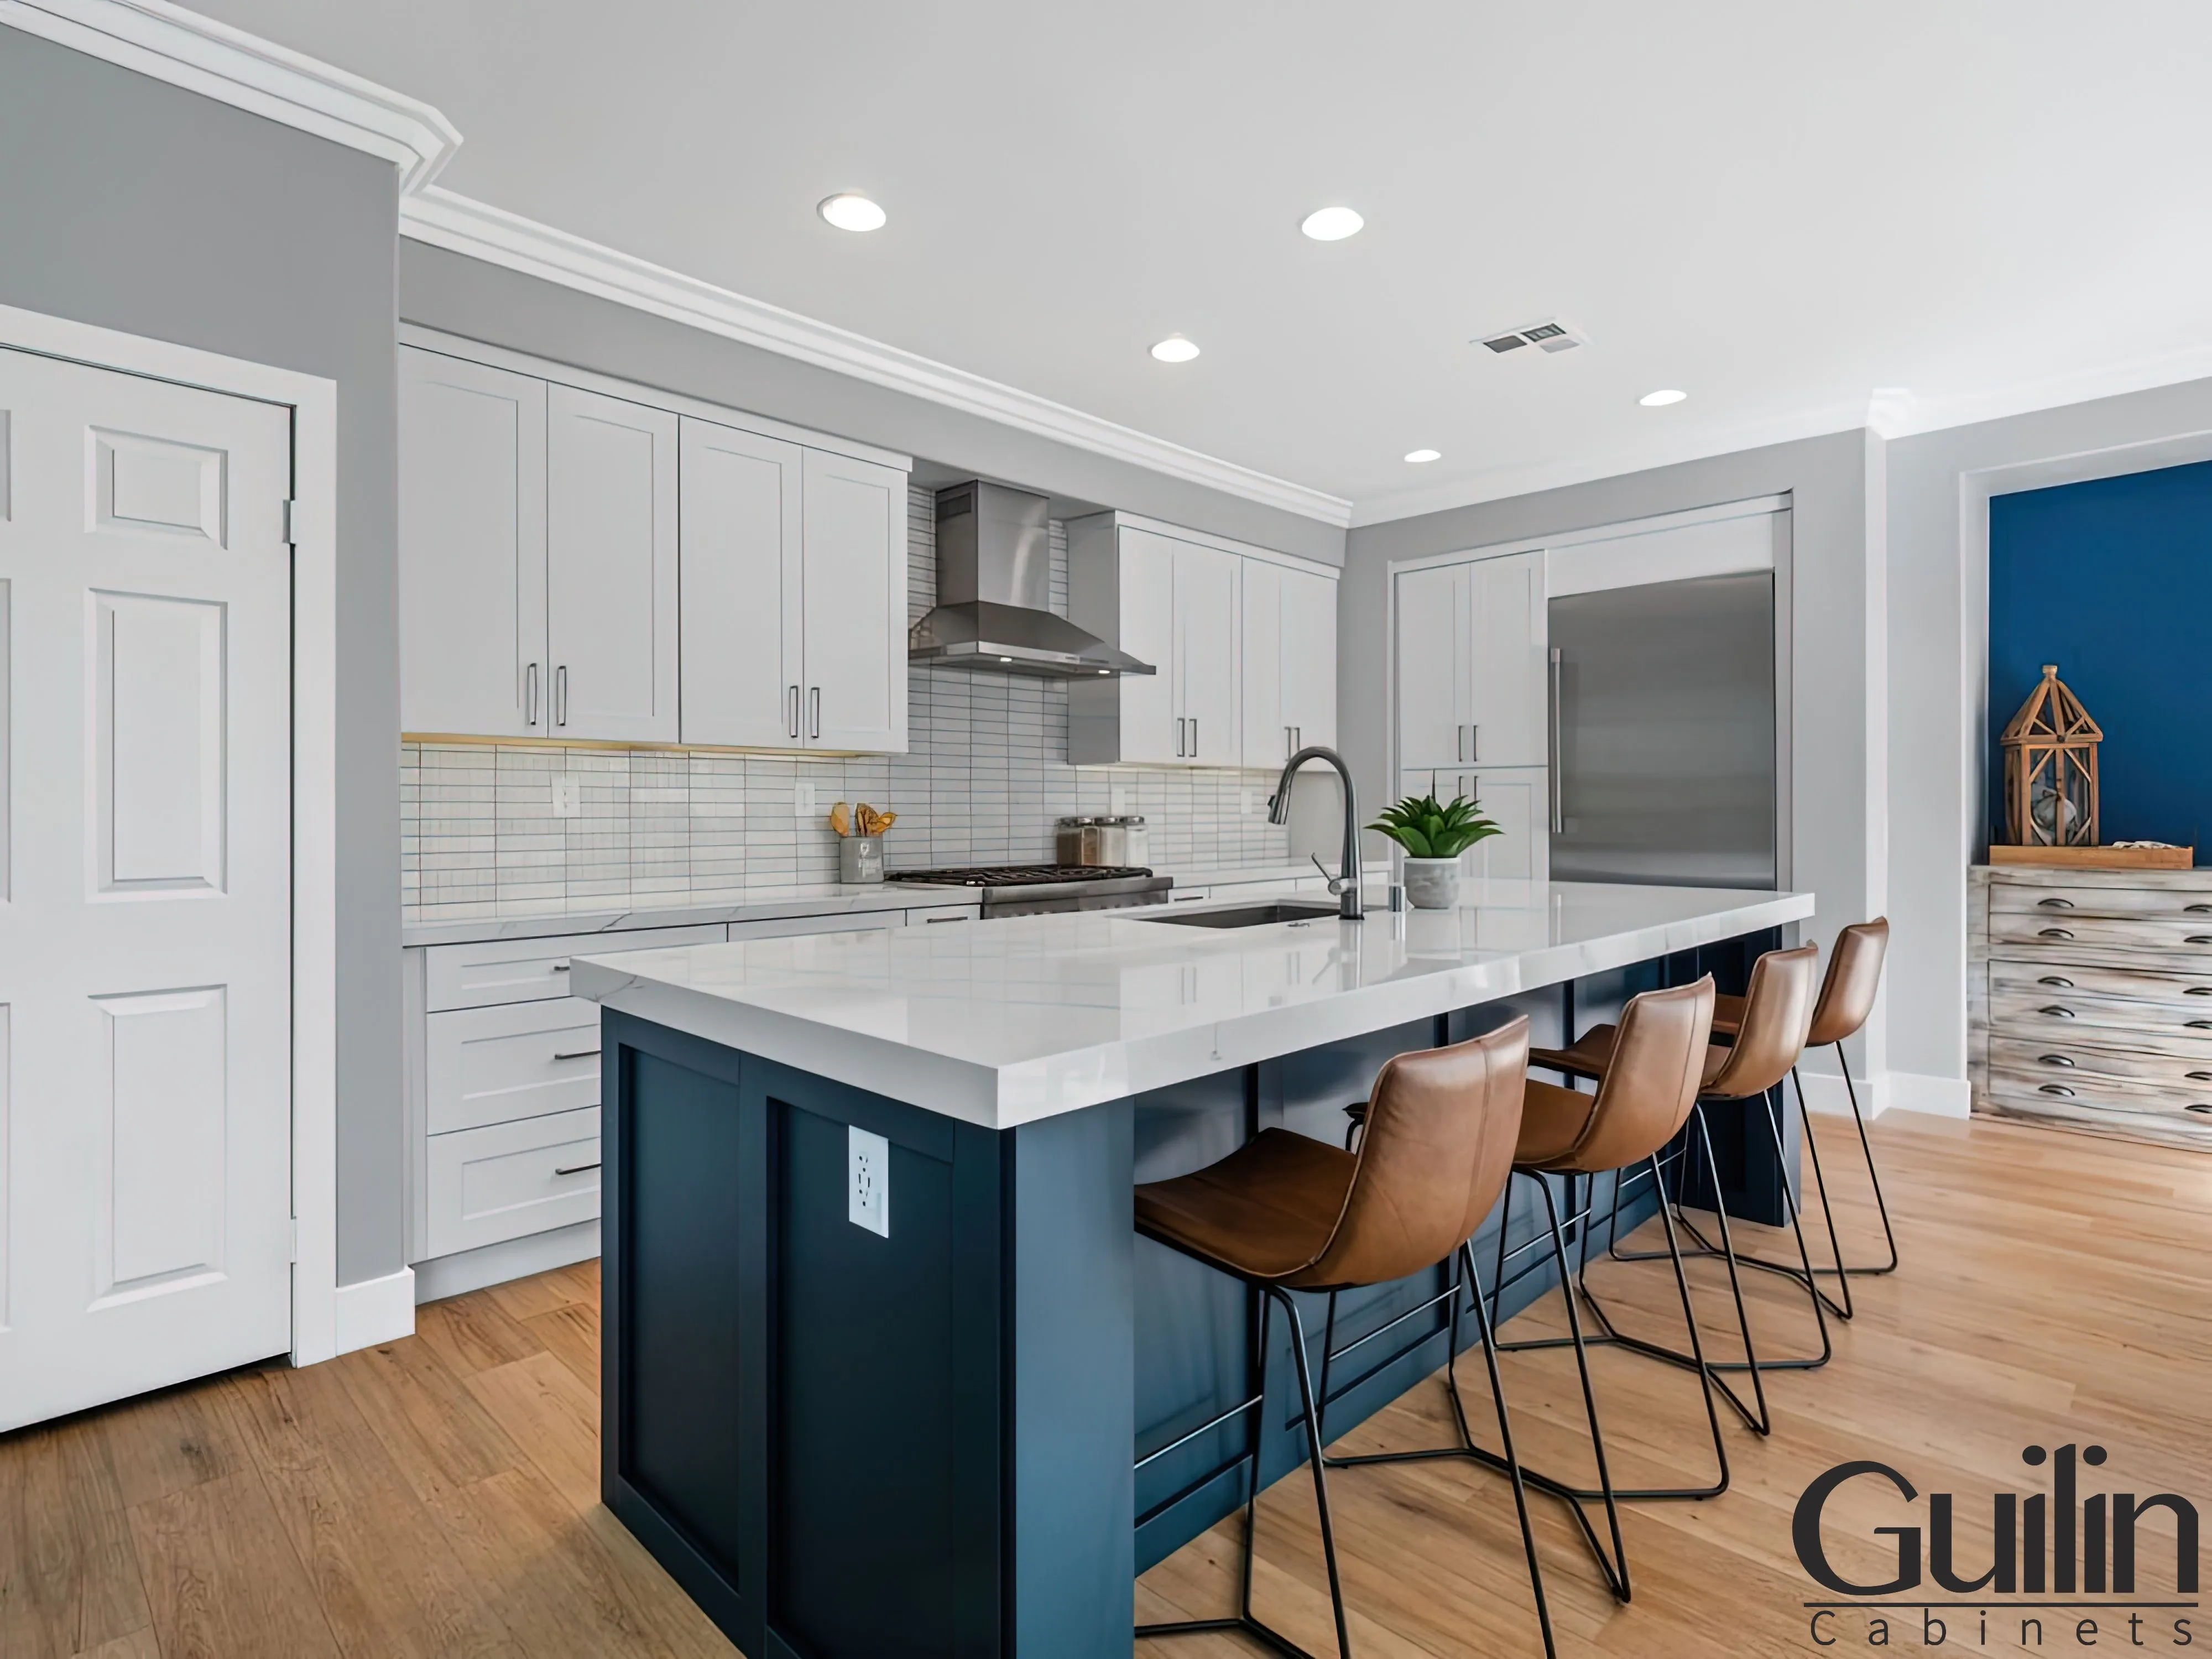 If you have dark cabinets, a lighter-colored countertop like granite or quartz will provide a striking contrast that will add depth and character to your kitchen.